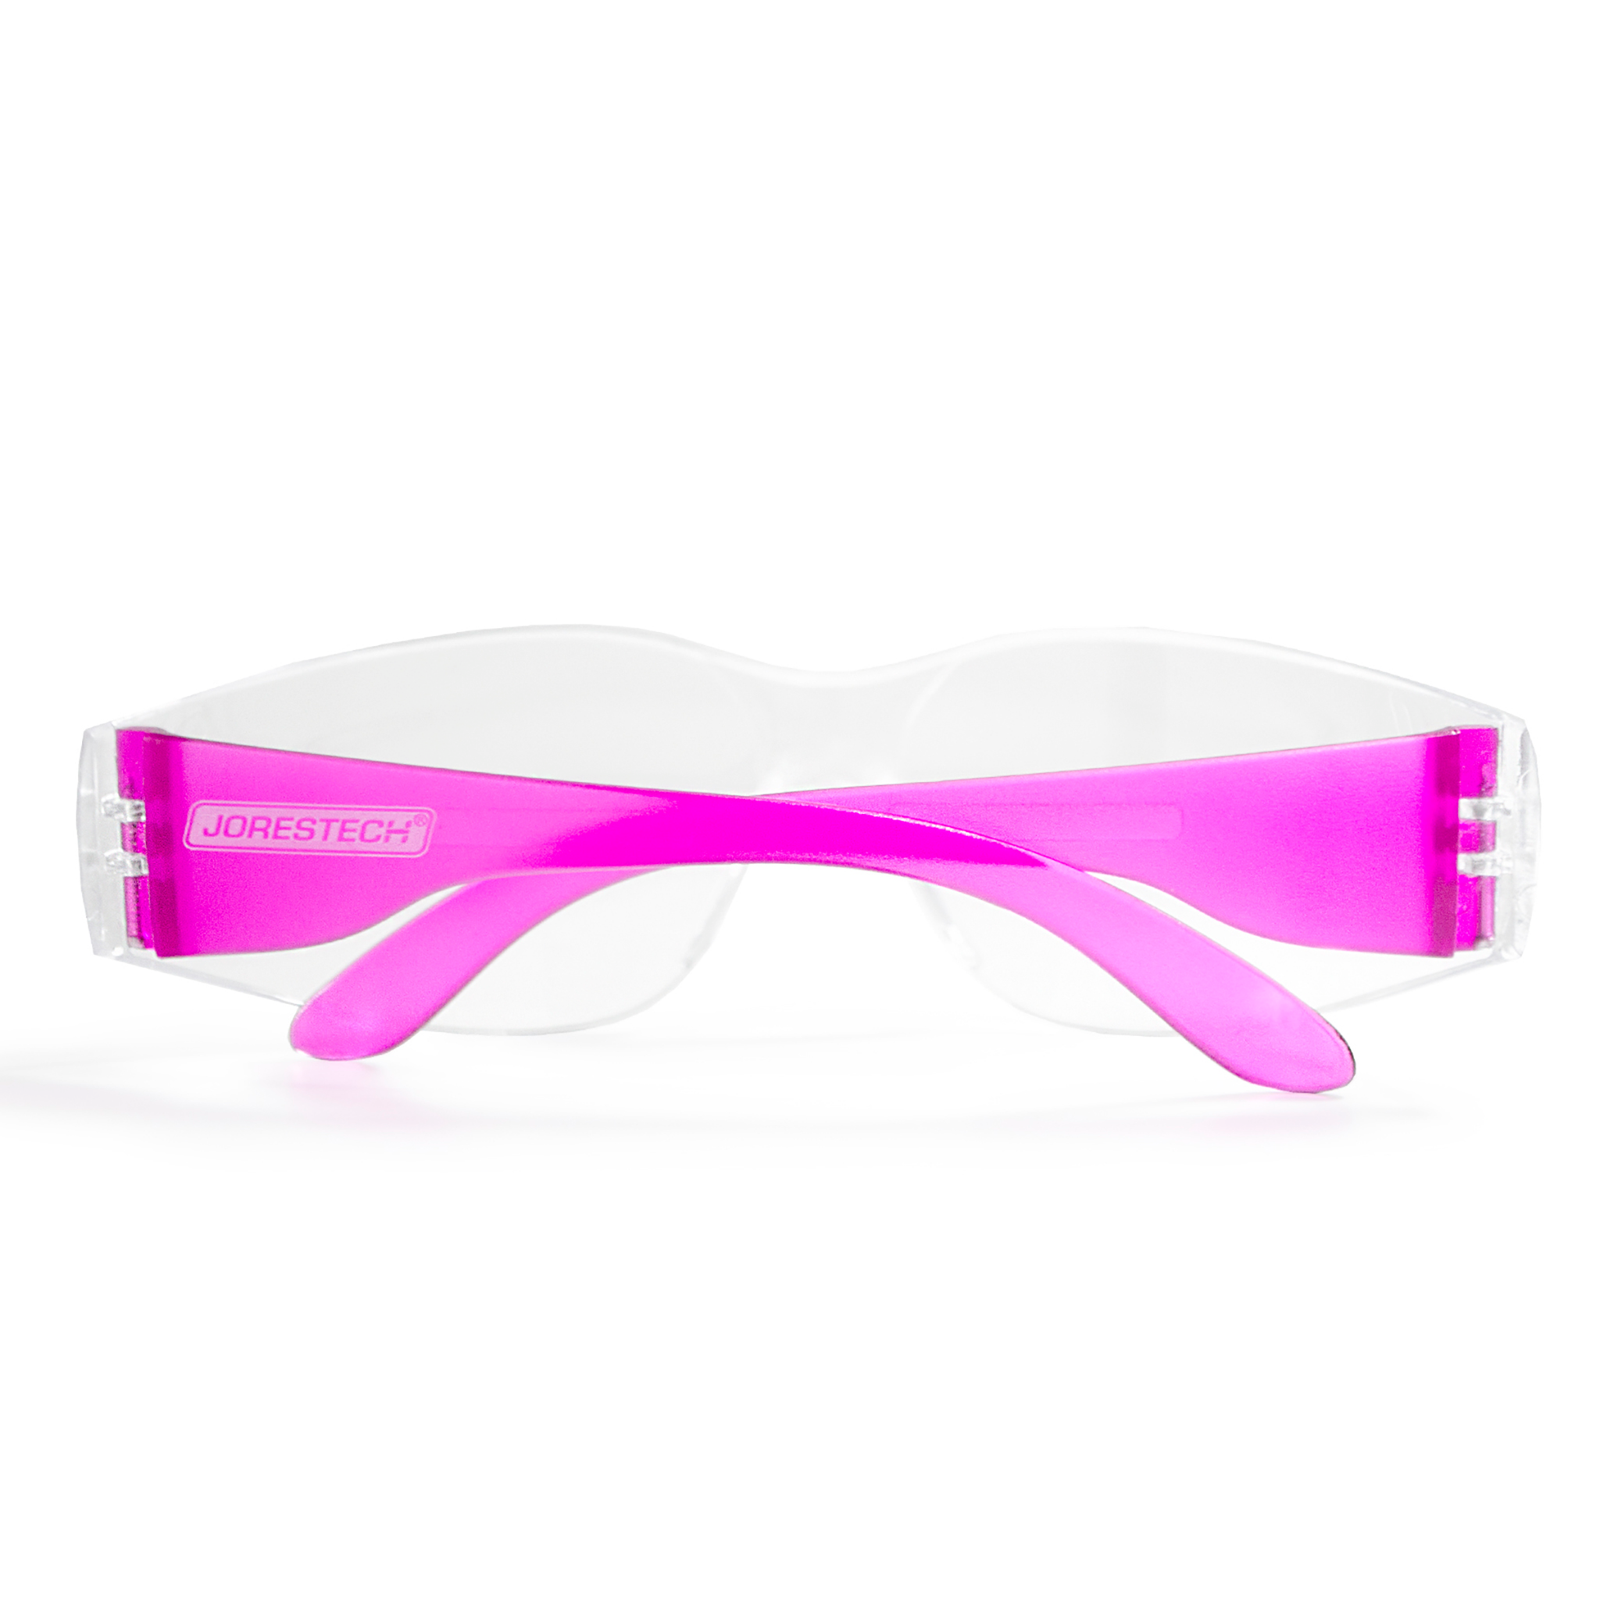 ANSI compliant clear safety glasses for high impact protection with colored pink temples